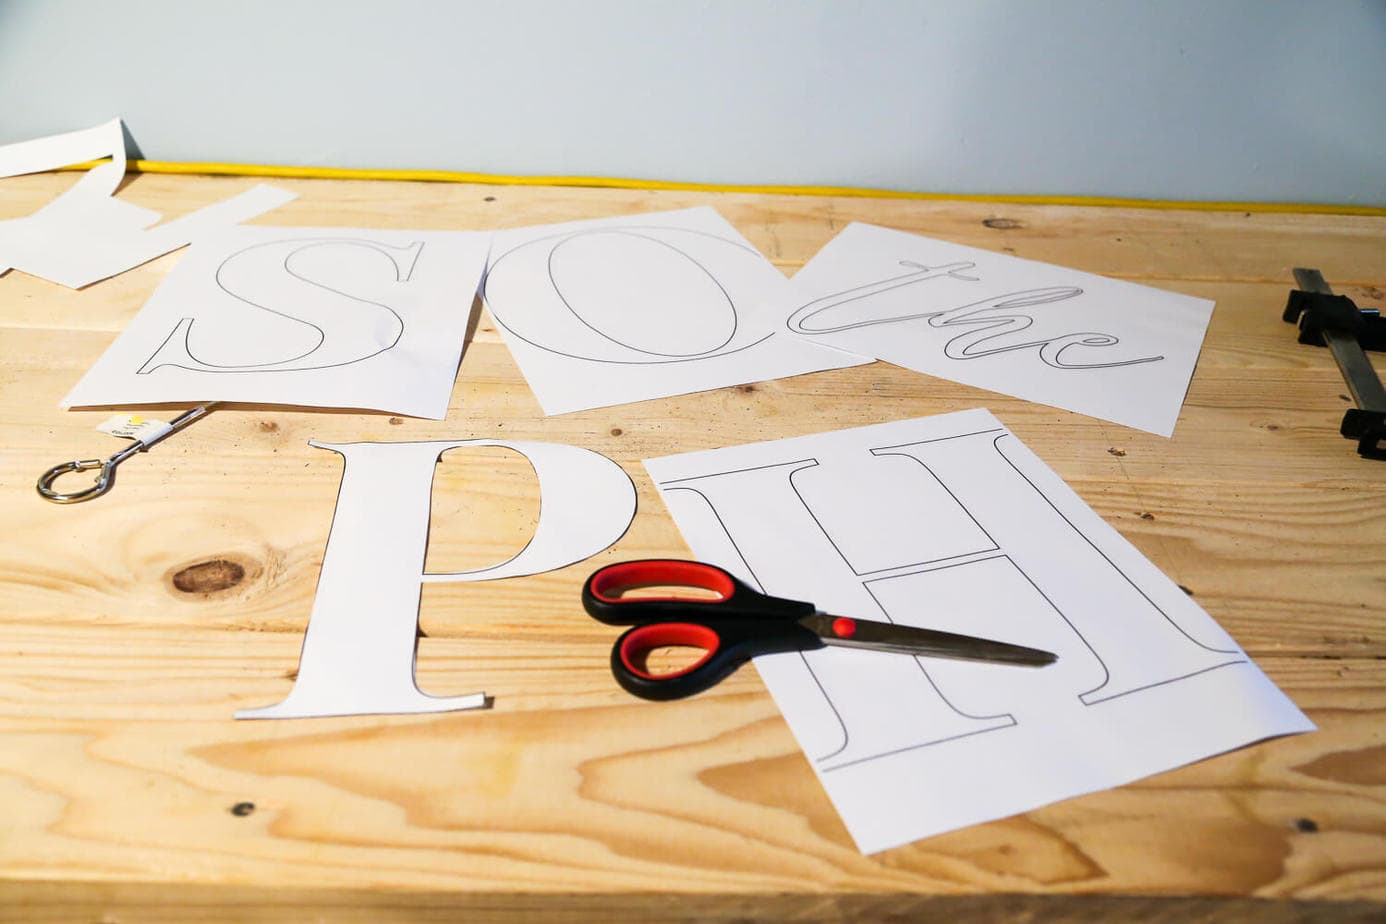 How to make a wooden sign to hang in your home using a jigsaw to cut out the letters. Really cute idea for an outdoor building, a bedroom, or anywhere else in the house! 